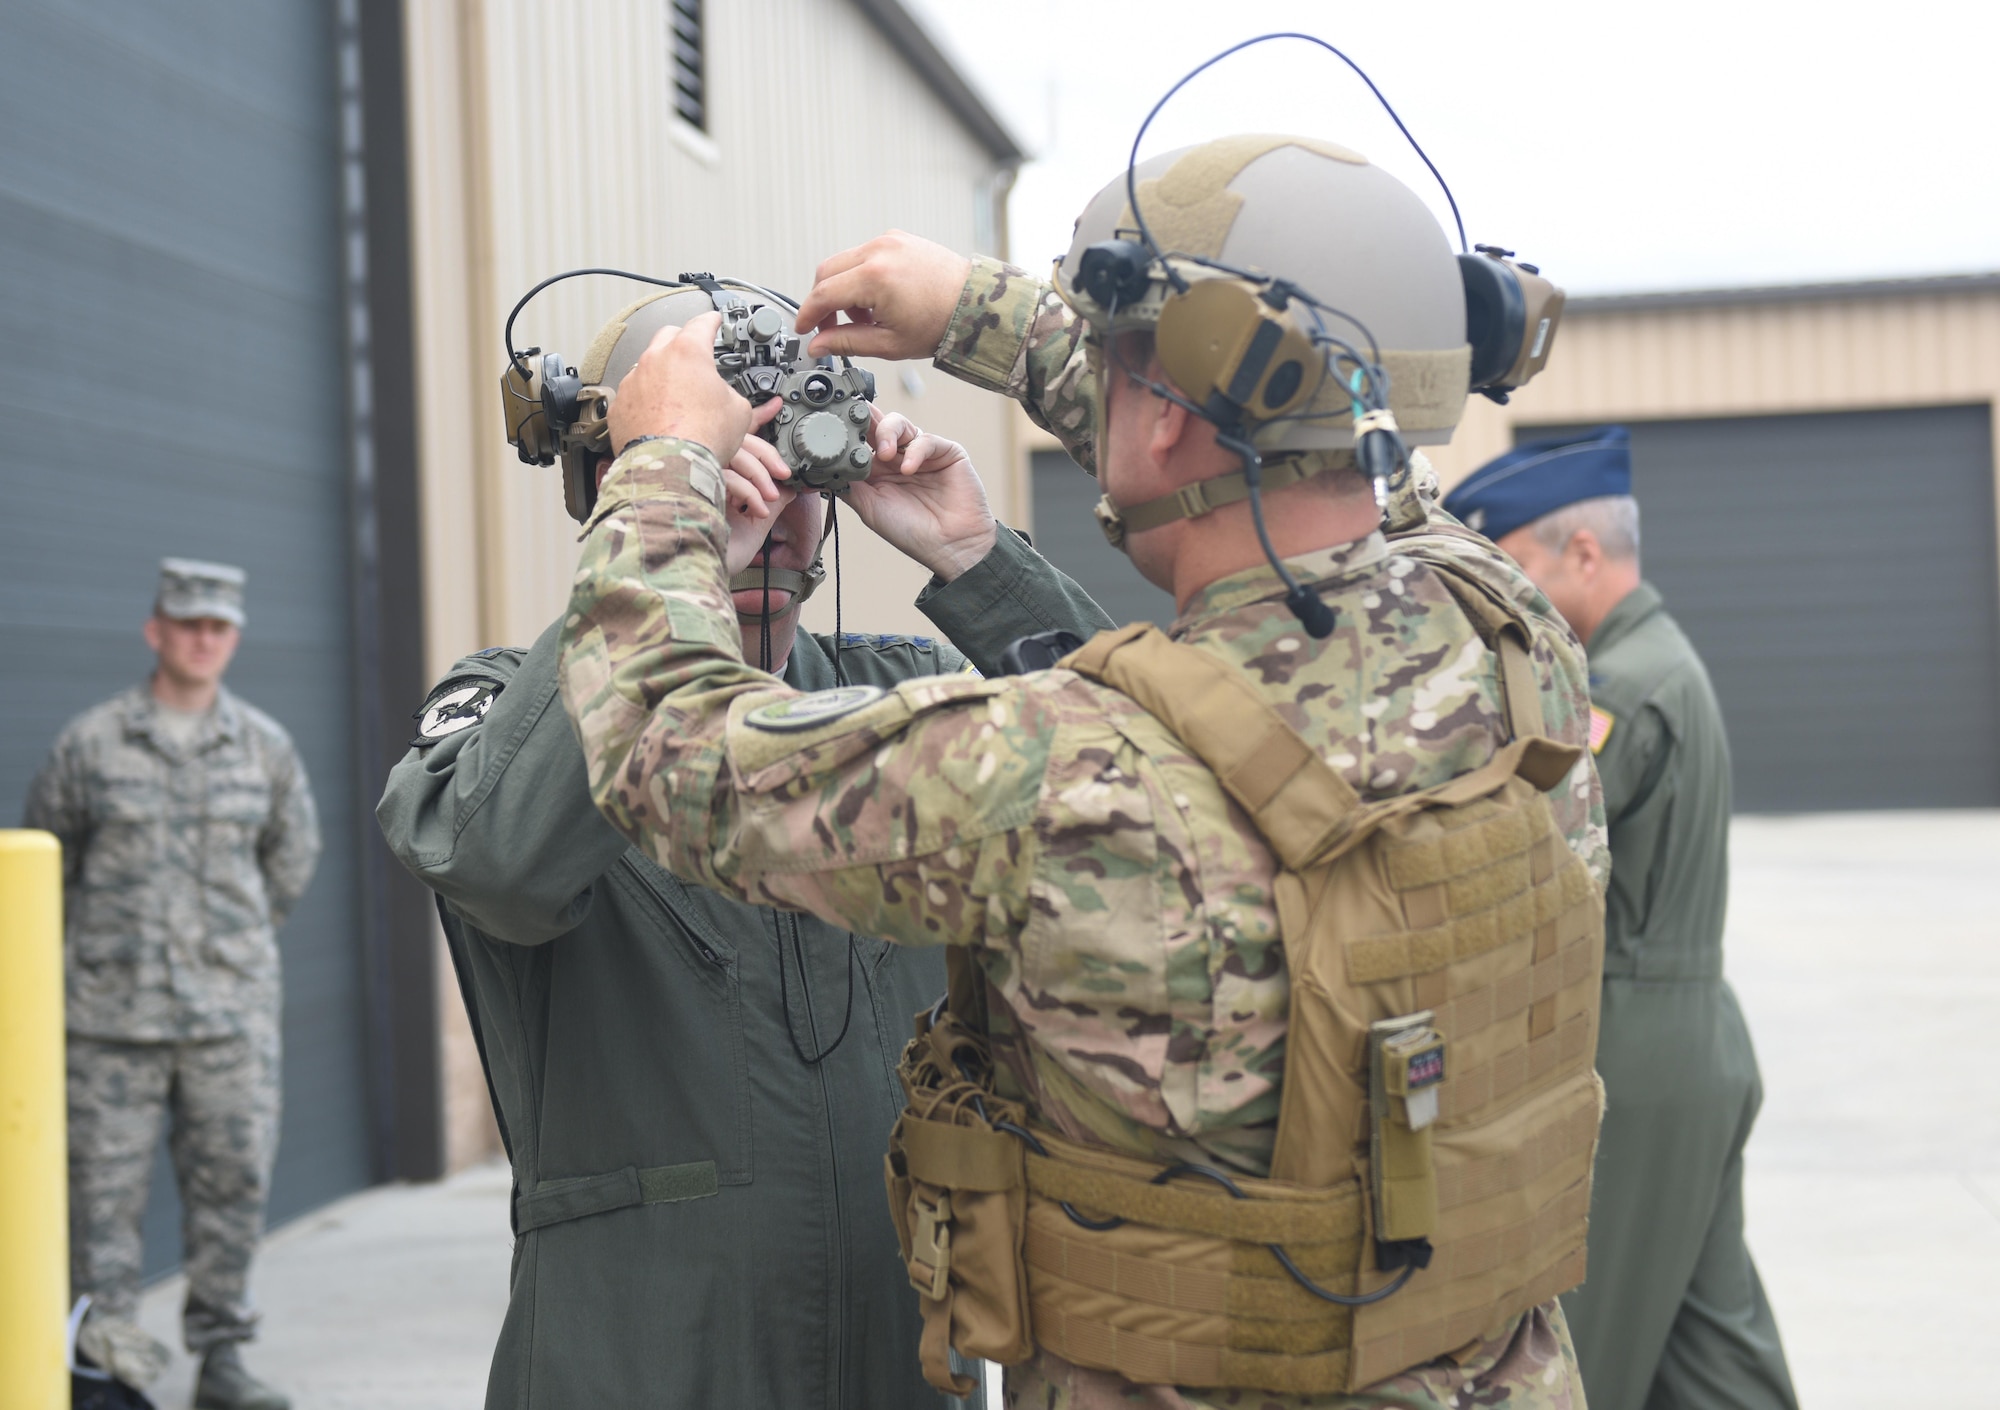 During a tour June 10, 2017, of the 193rd Special Operations Wing, Middletown, Pennsylvania, Staff Sgt. Shawn Kobel, a security forces specialist with the 193rd Special Operations Security Forces Squadron, shows U.S. Air Force Lt. Gen. Brad Webb (left), commander of Air Force Special Operations Command, how troops wear and operate the op-score helmet. These helmets are relatively new to the unit and include earmuffs and a radio, as well as nighttime and thermal vision. (U.S. Air National Guard photo by Senior Airman Julia Sorber/Released)